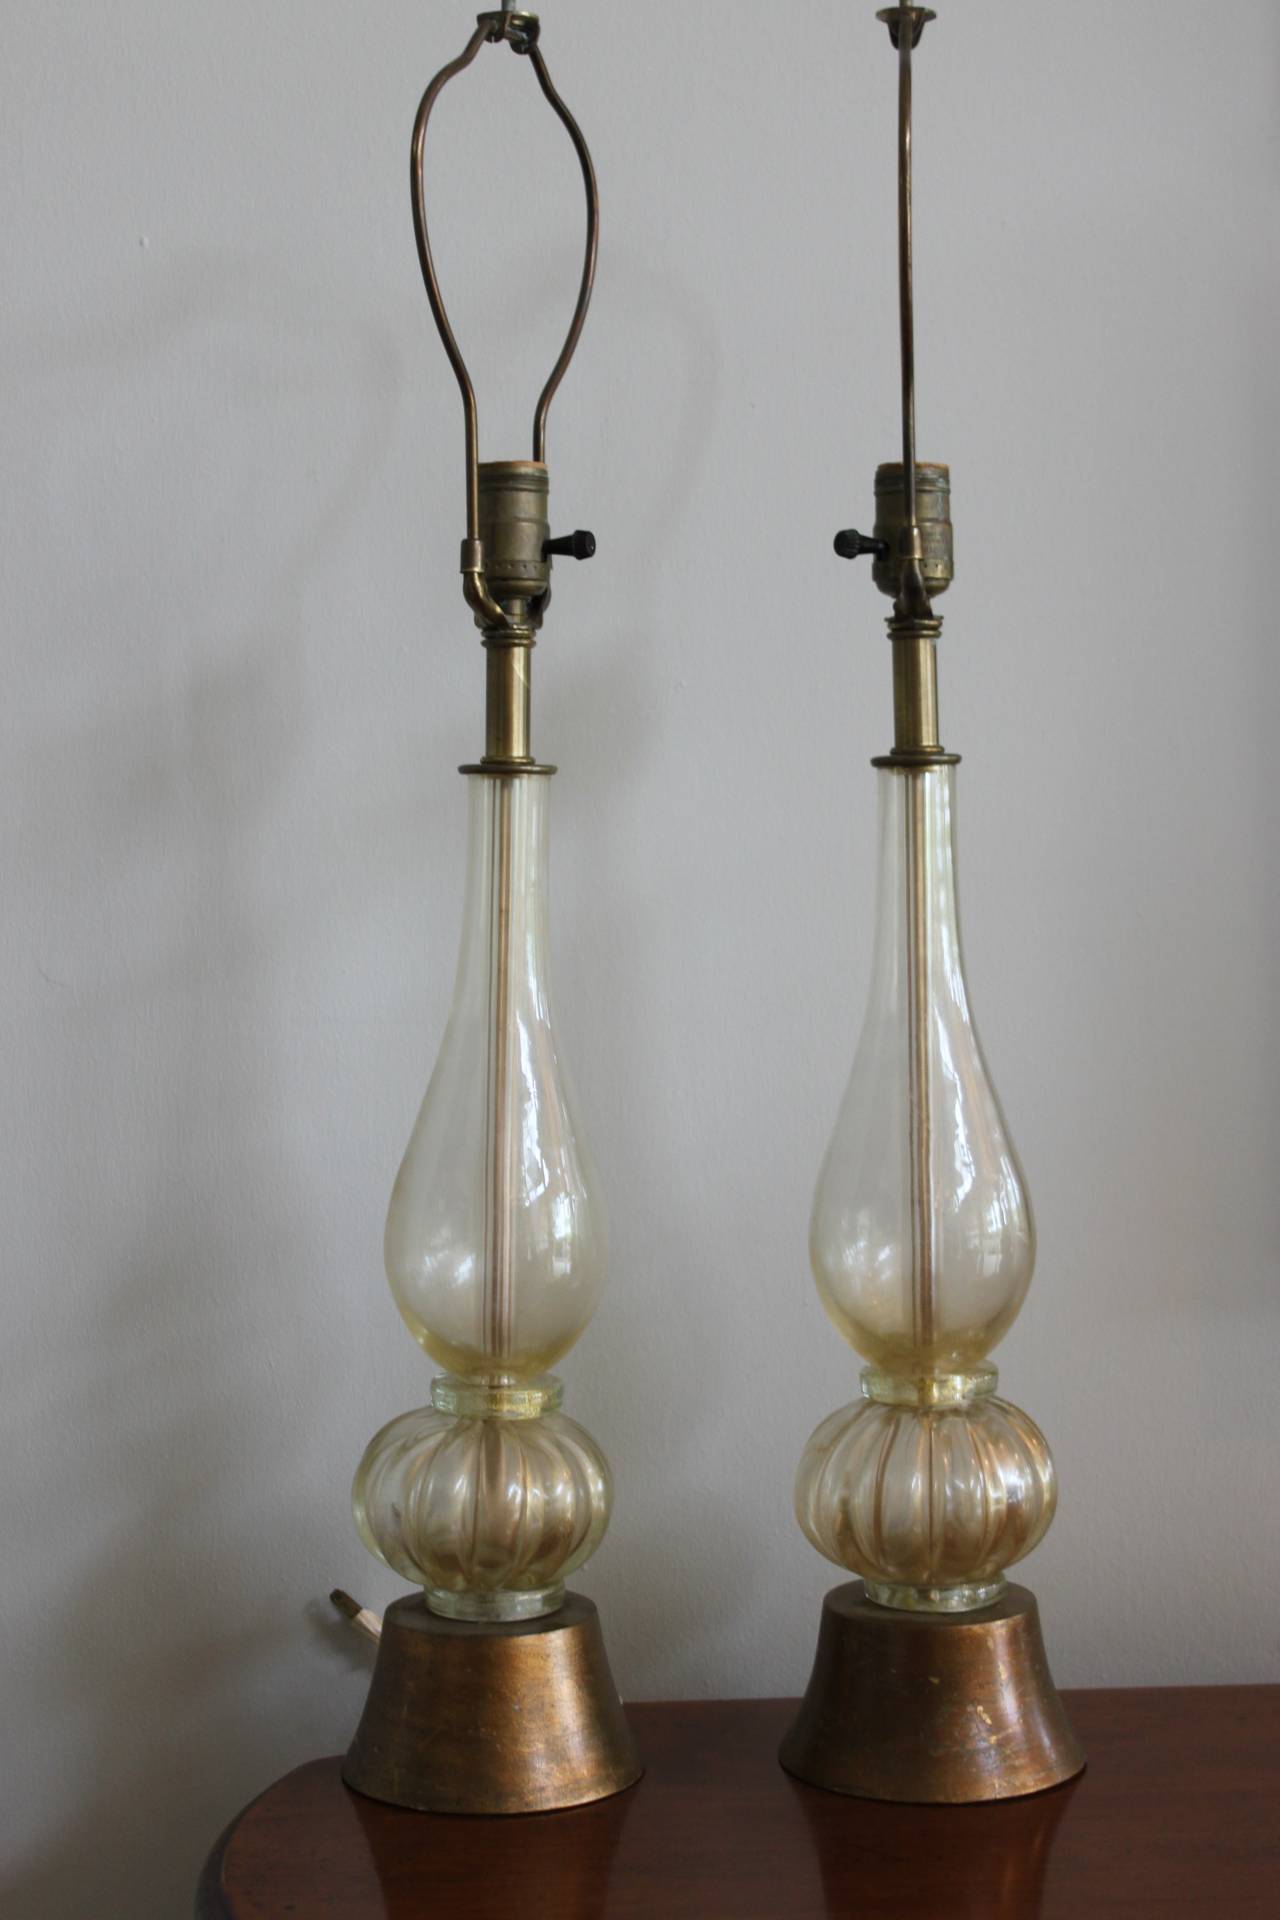 20th Century Pair of Murano Lamps in the Style of Barovier and Toso, circa 1940